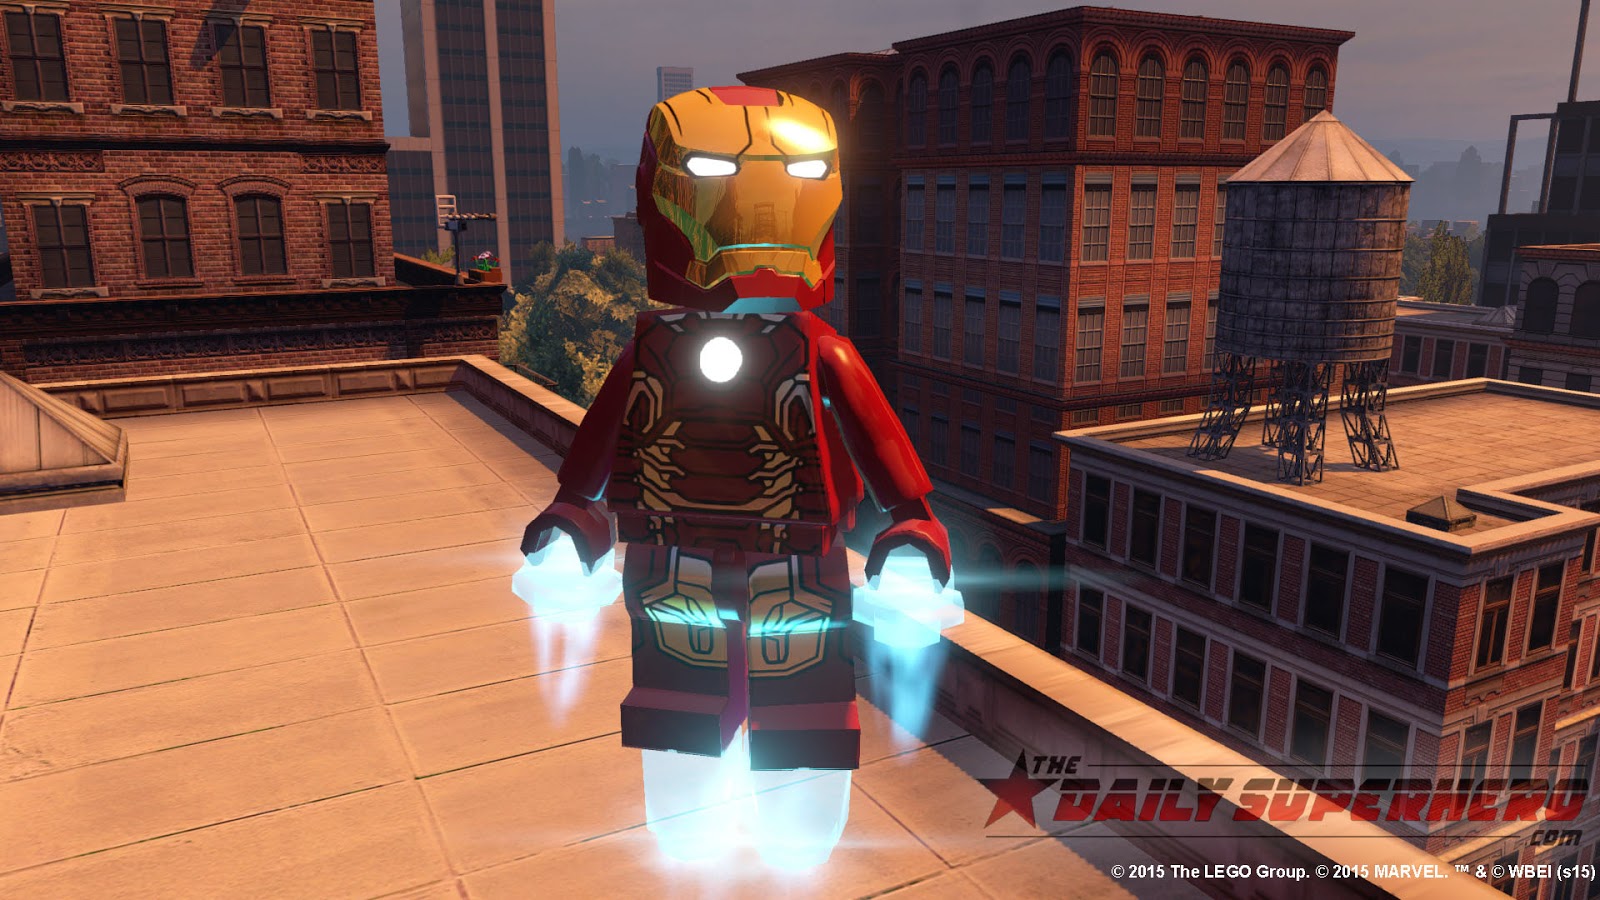  LEGO Marvel39;s Avengers game coming this fall/winter. Click to see both